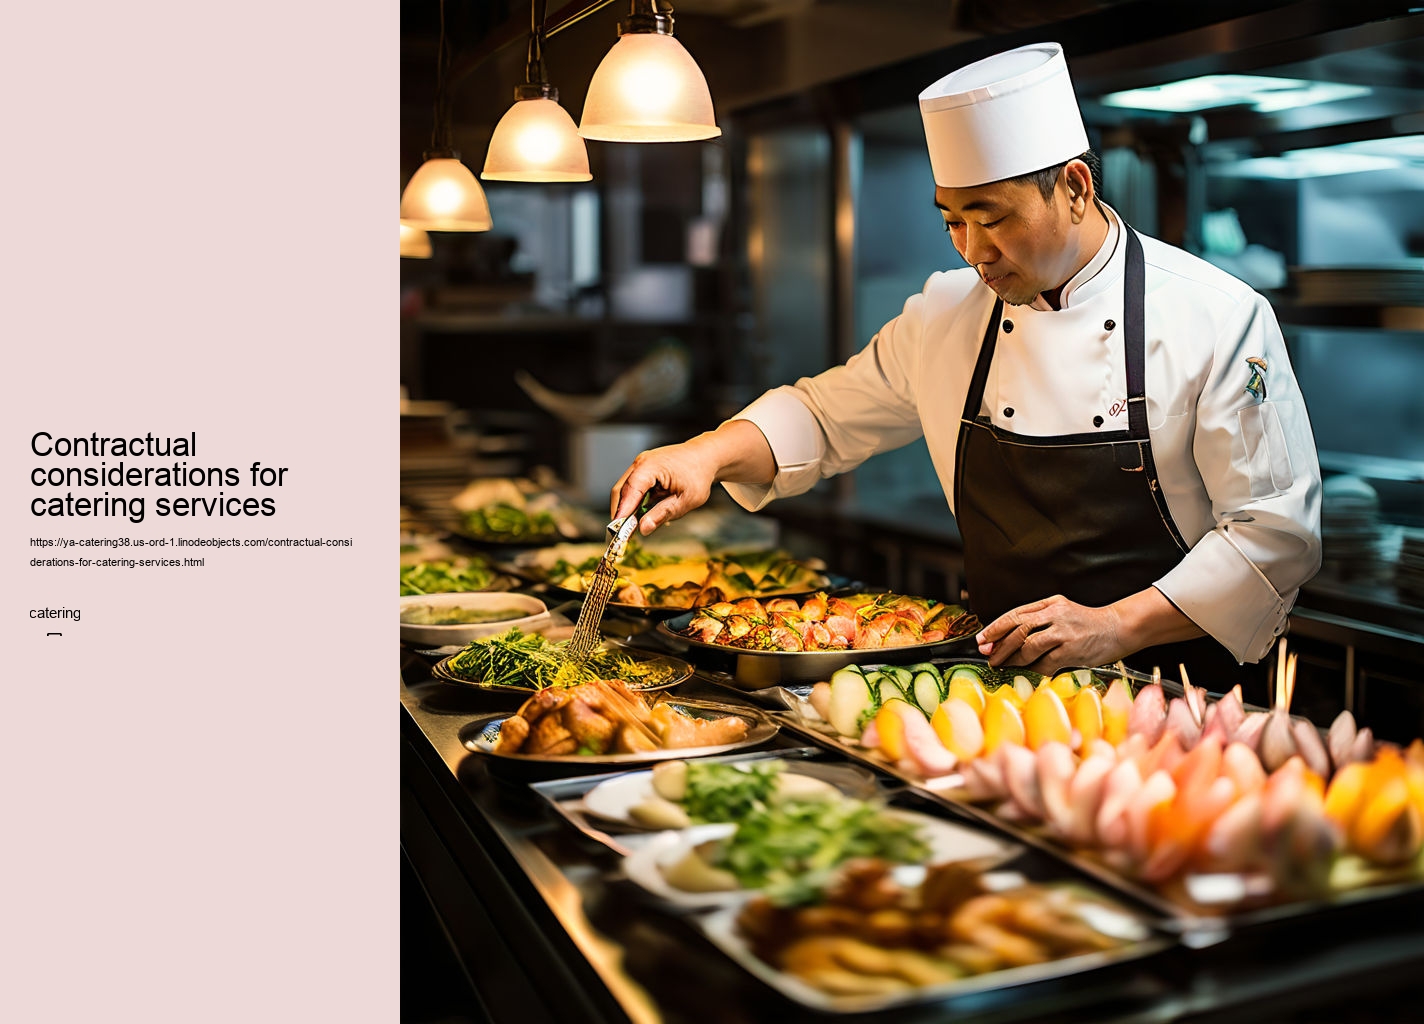 Contractual considerations for catering services